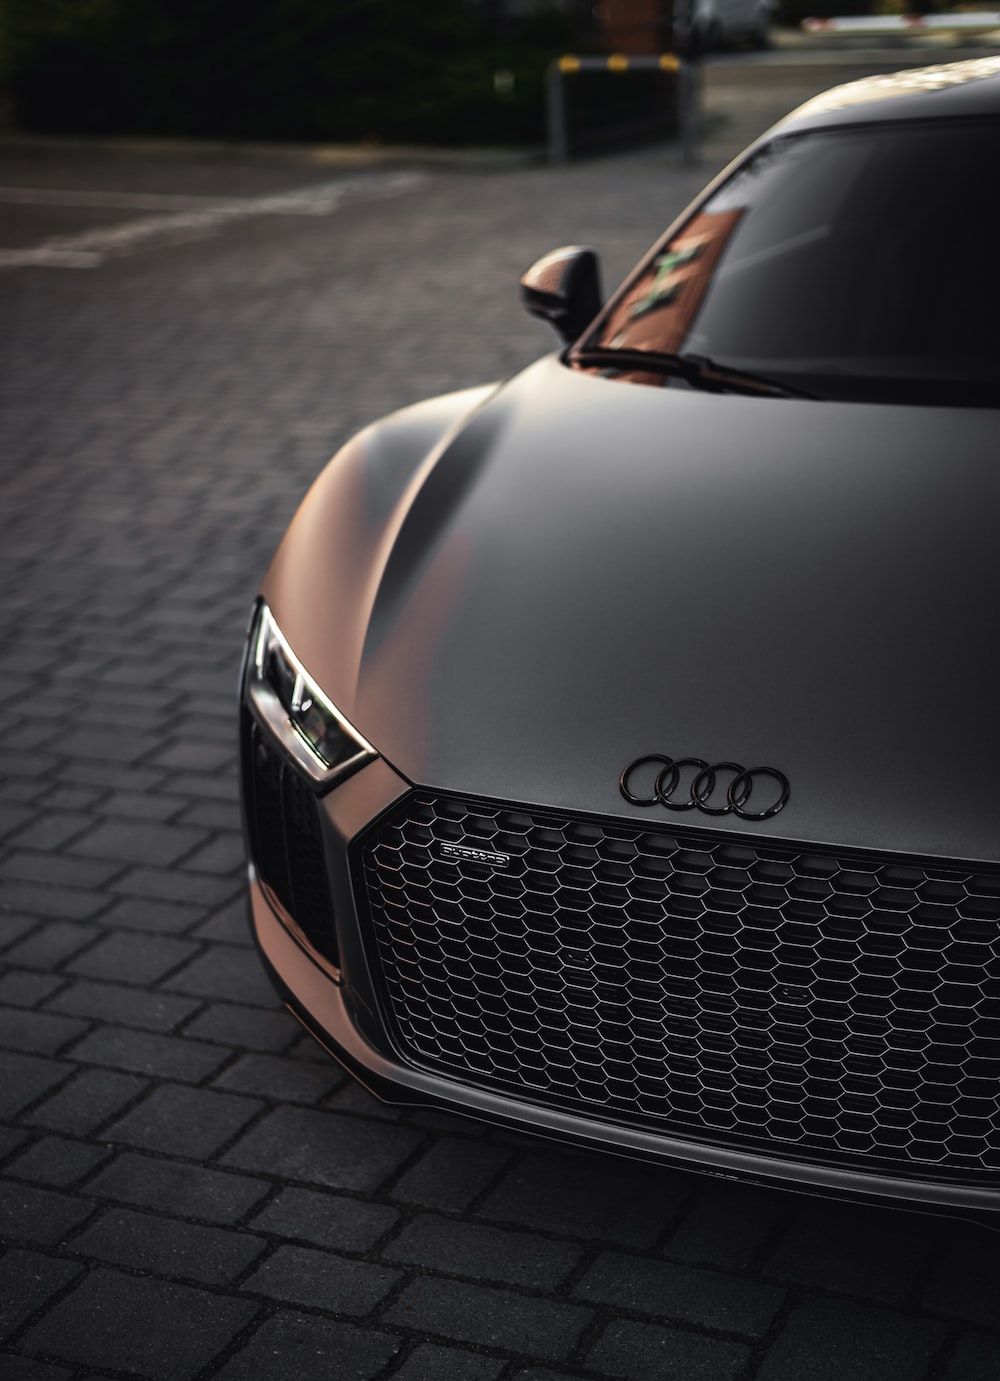 Audi R8 Picture. Download Free Image